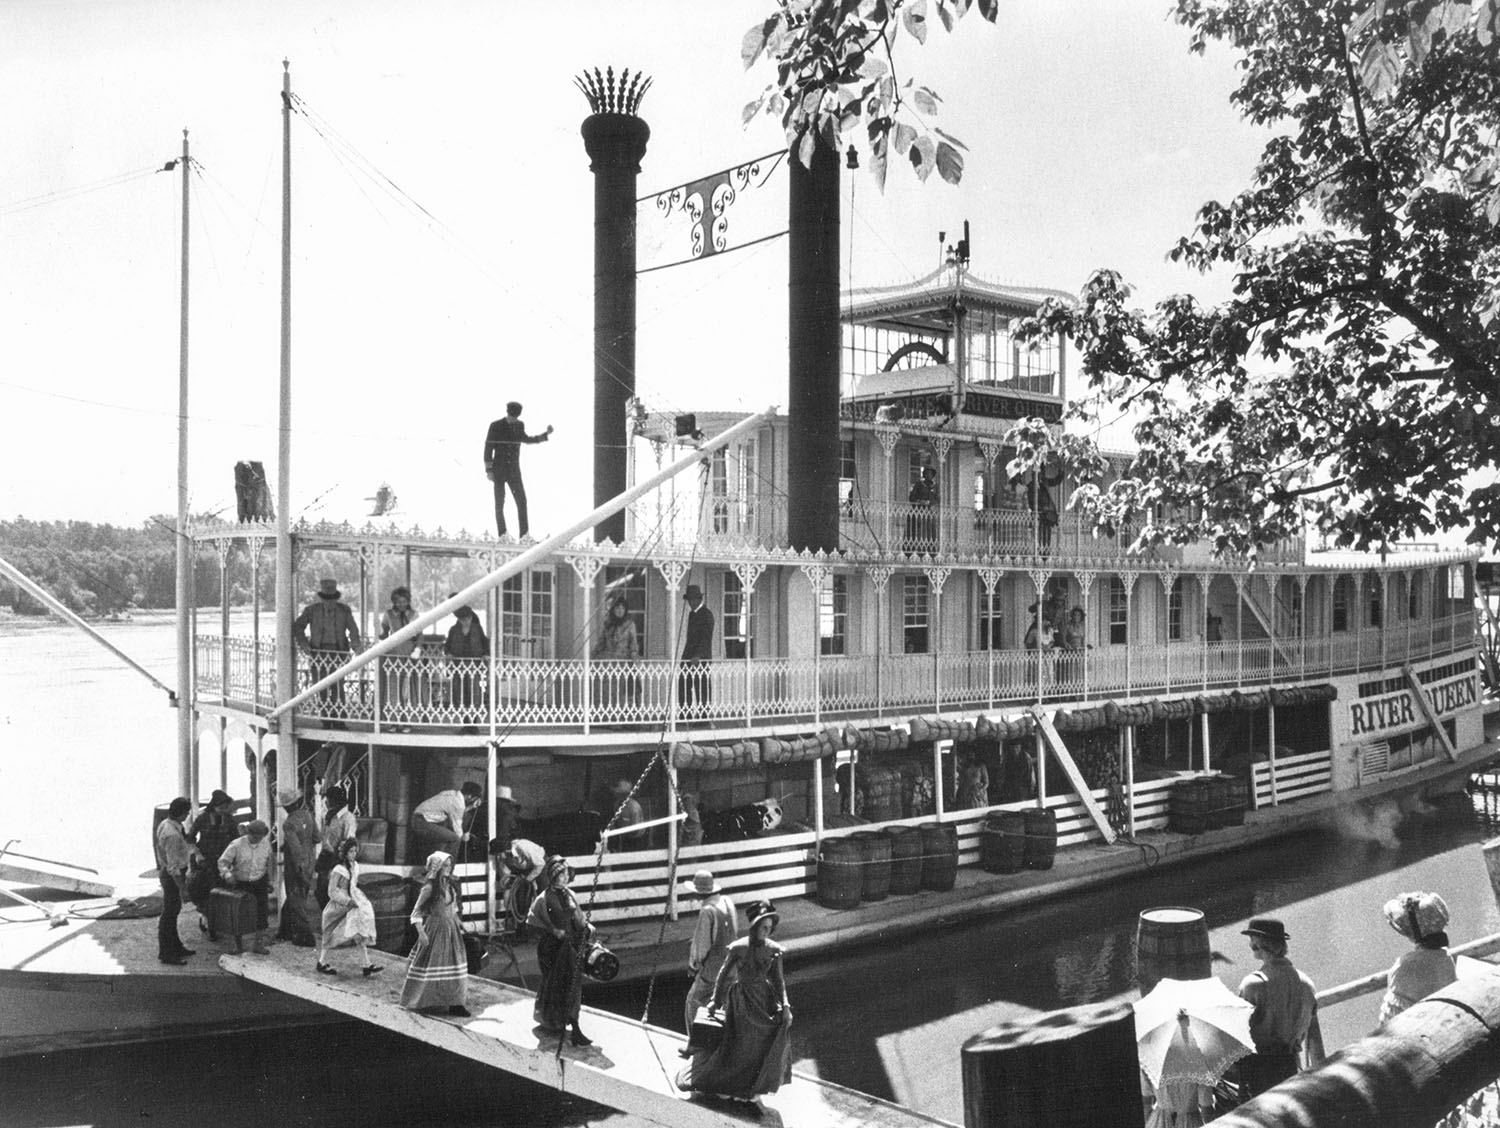 The Str. Julia Belle Swain during filming of “Tom Sawyer.” (Keith Norrington collection)